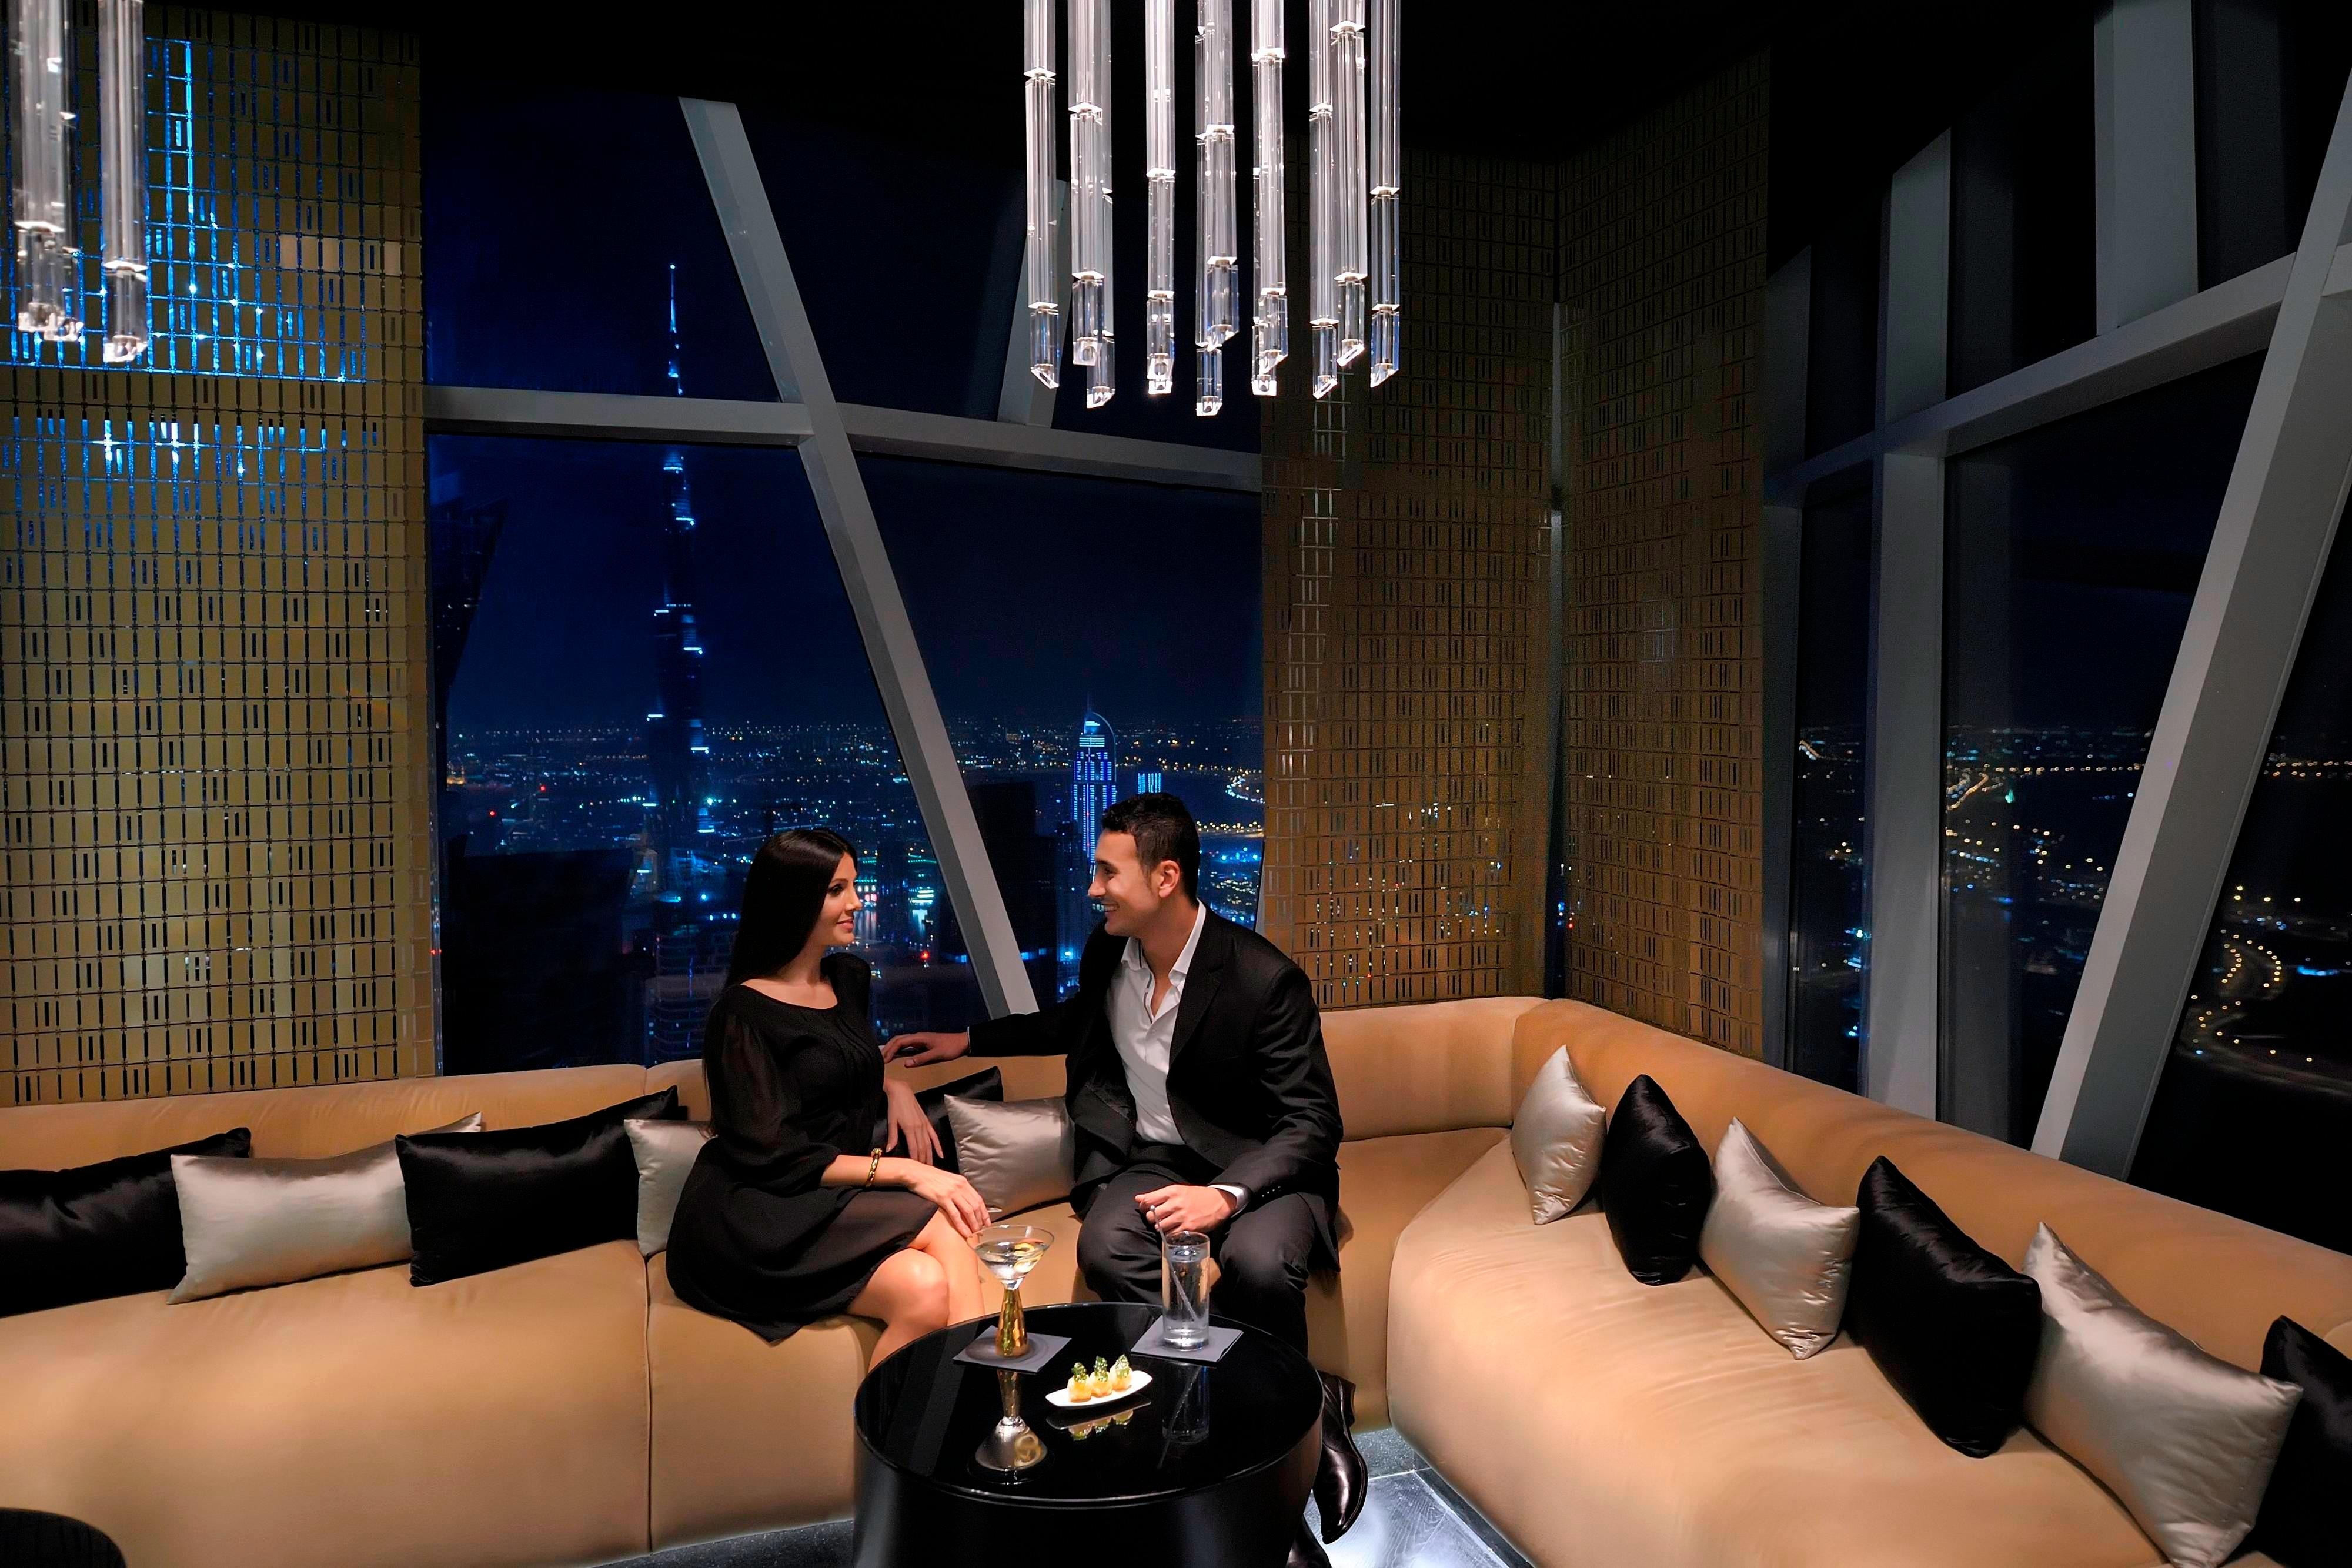 People sitting on sofas near windows with high floor city views at night